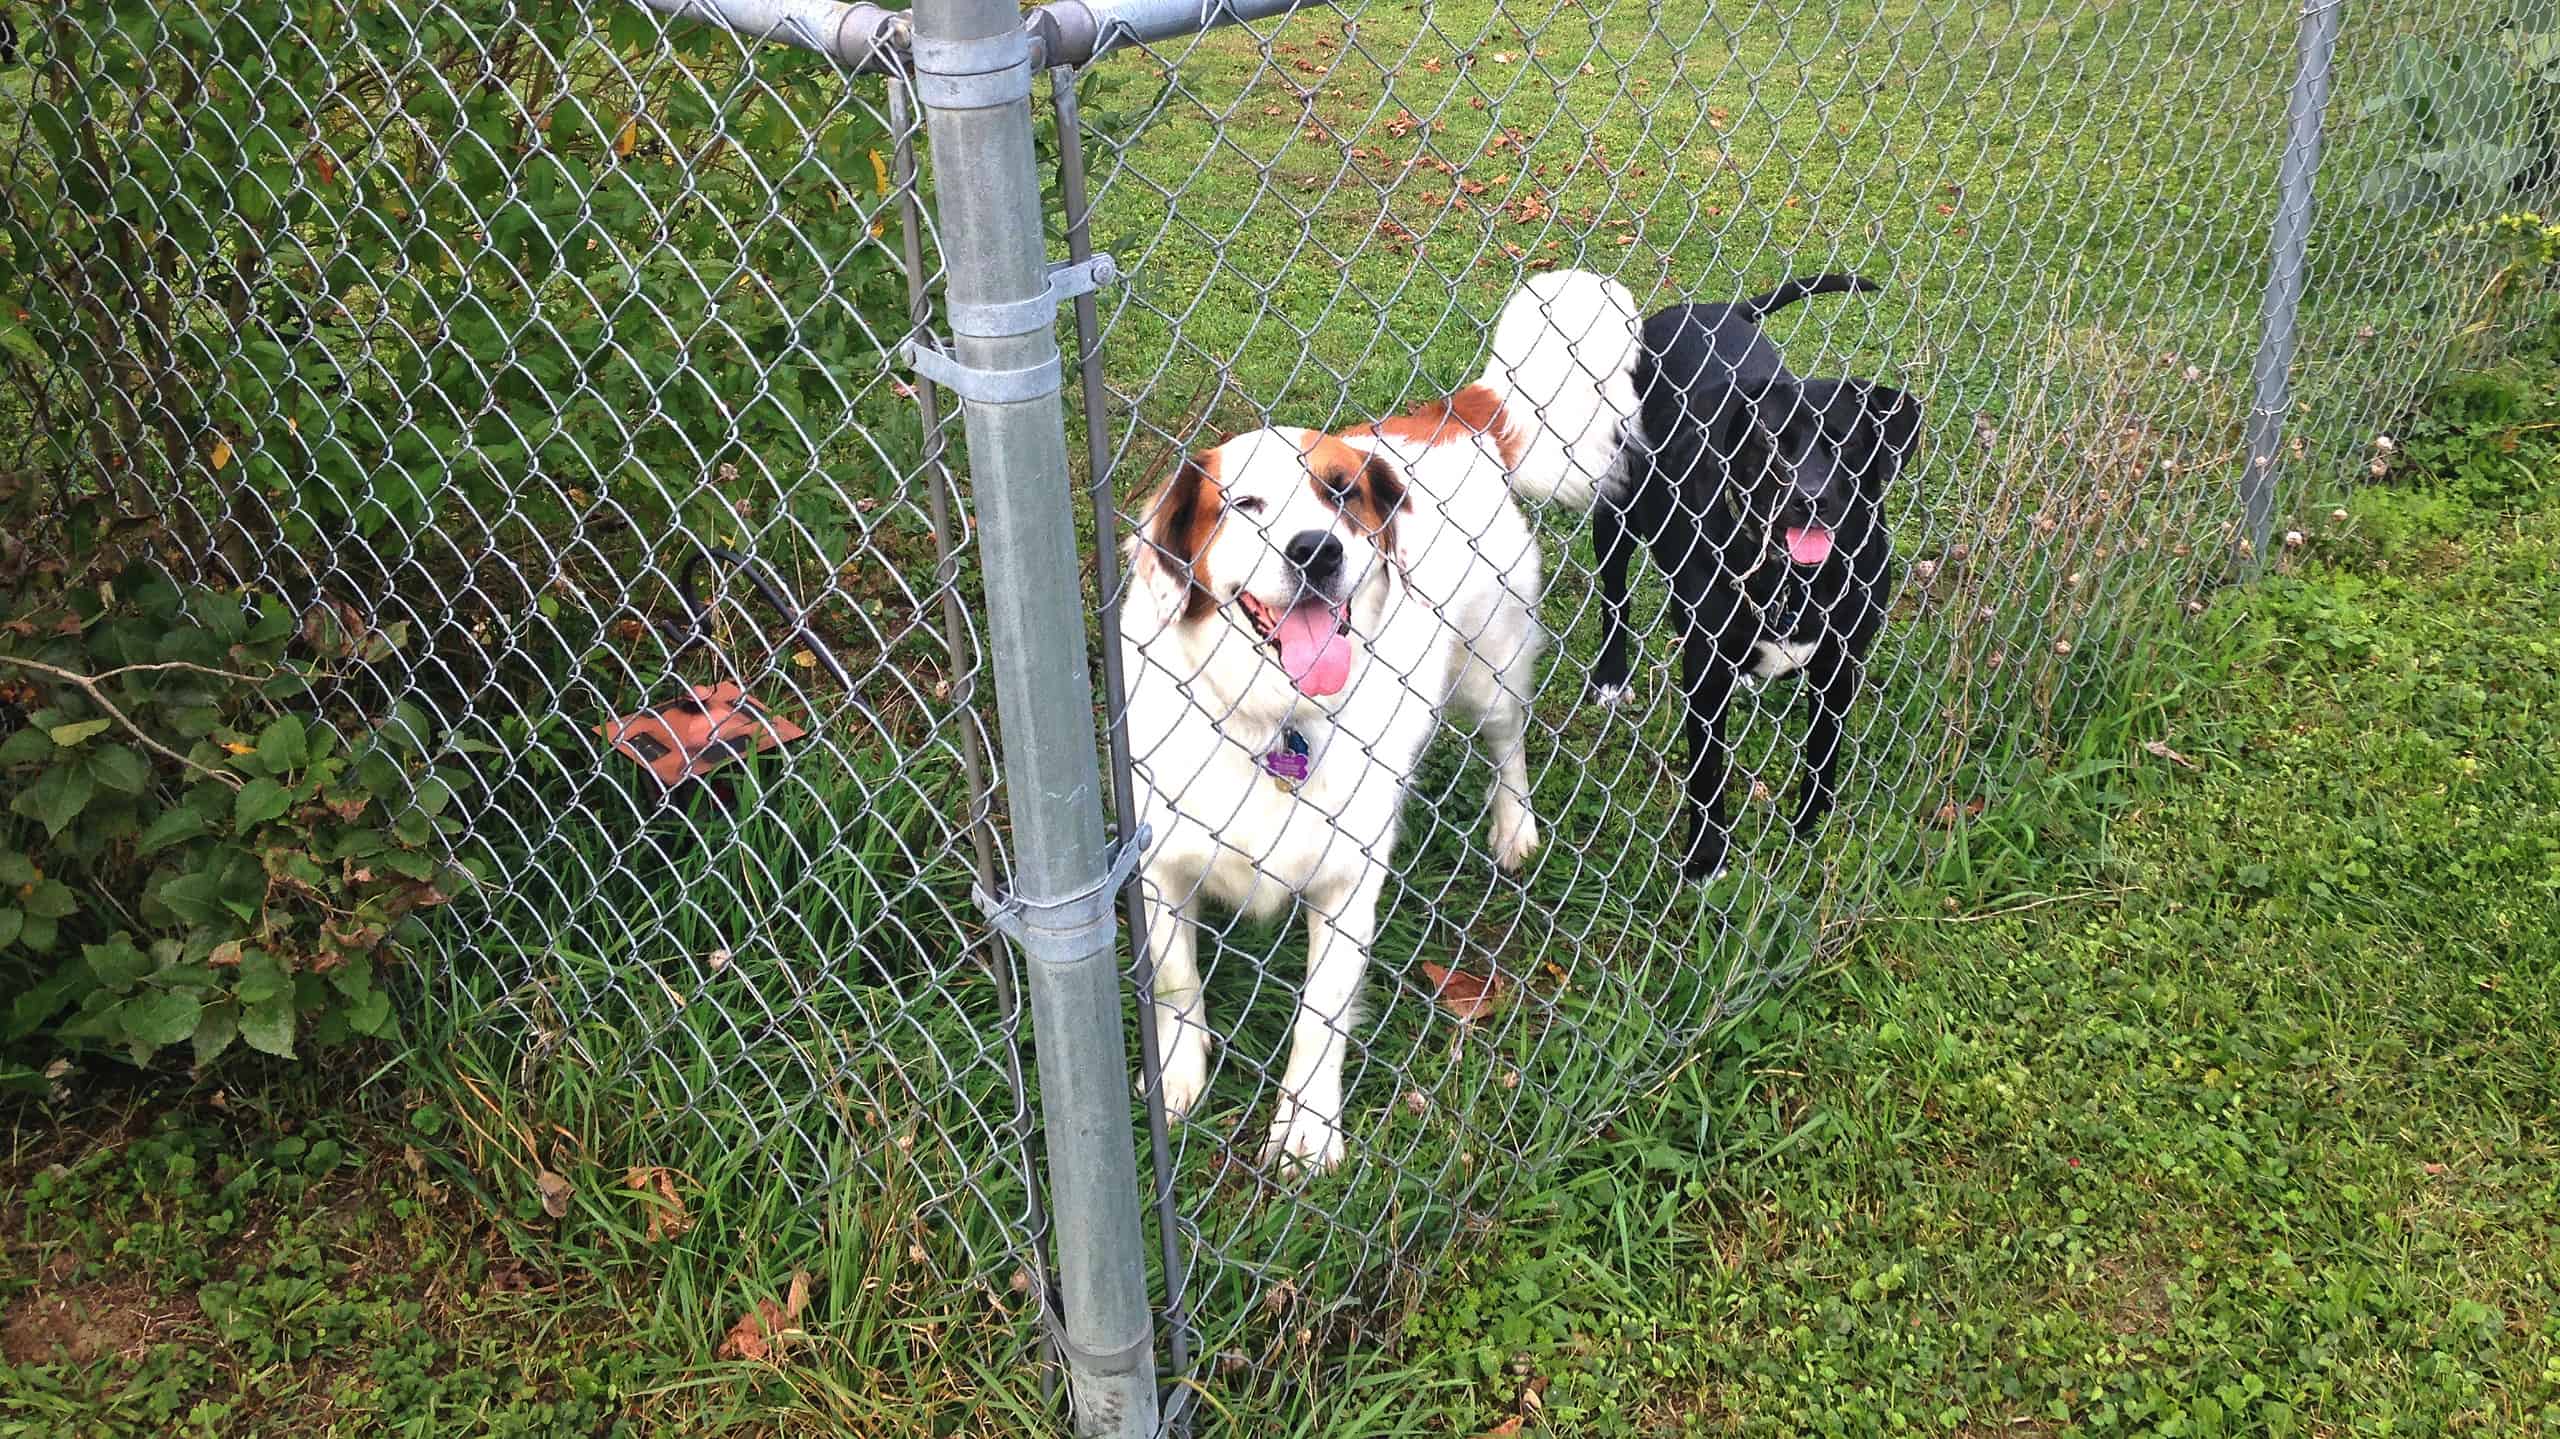 Two dogs in front of a chain-linked fence